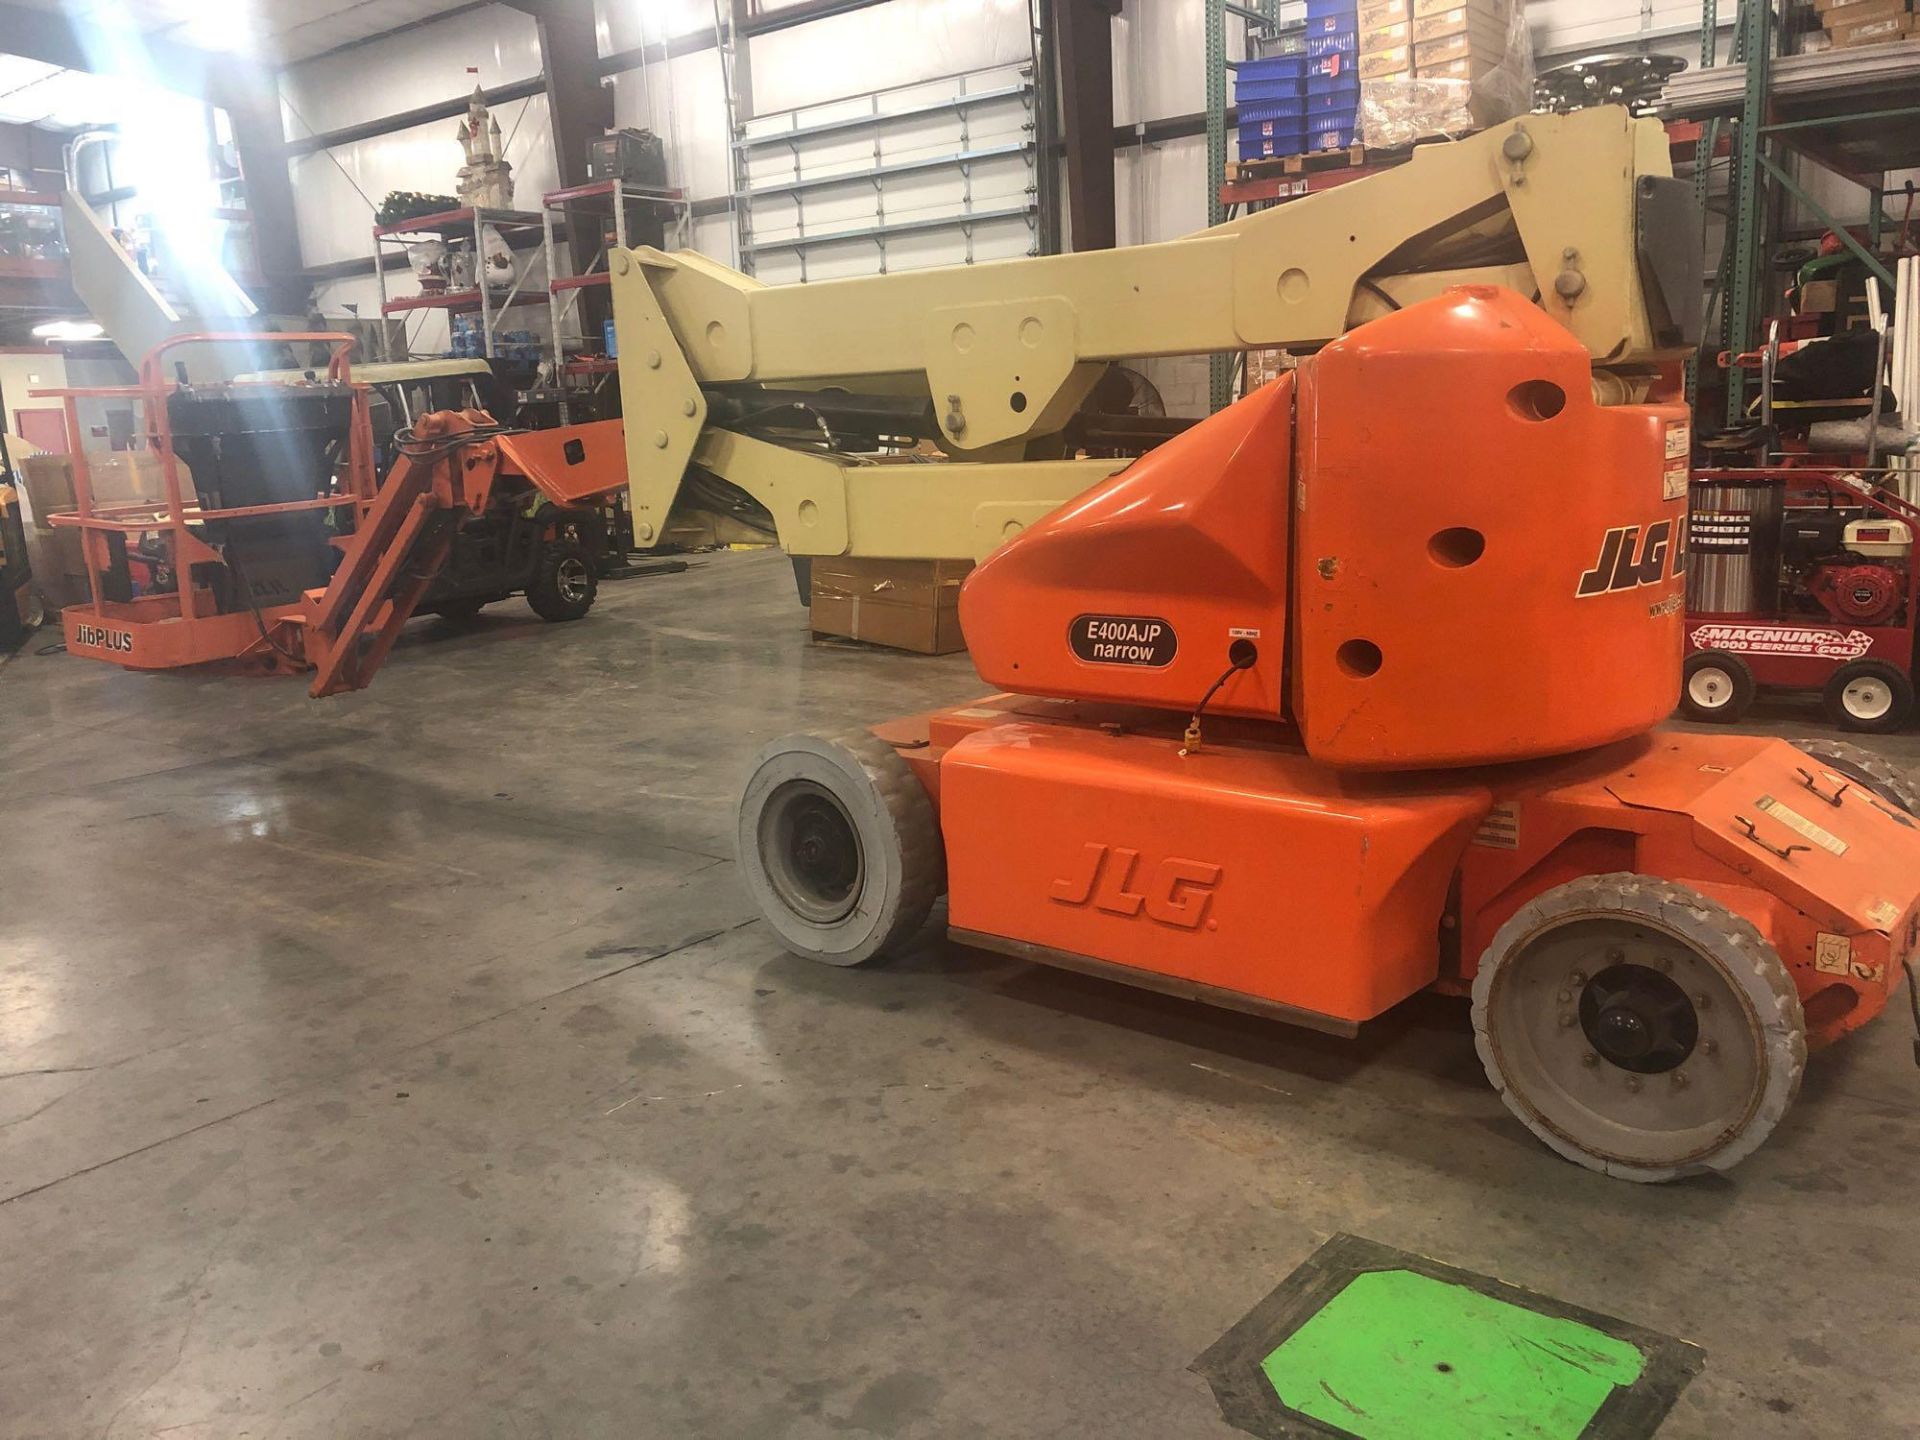 JLG E400AJP ELECTRIC ARTICULATING BOOM LIFT, 40' HEIGHT CAP - Image 2 of 6